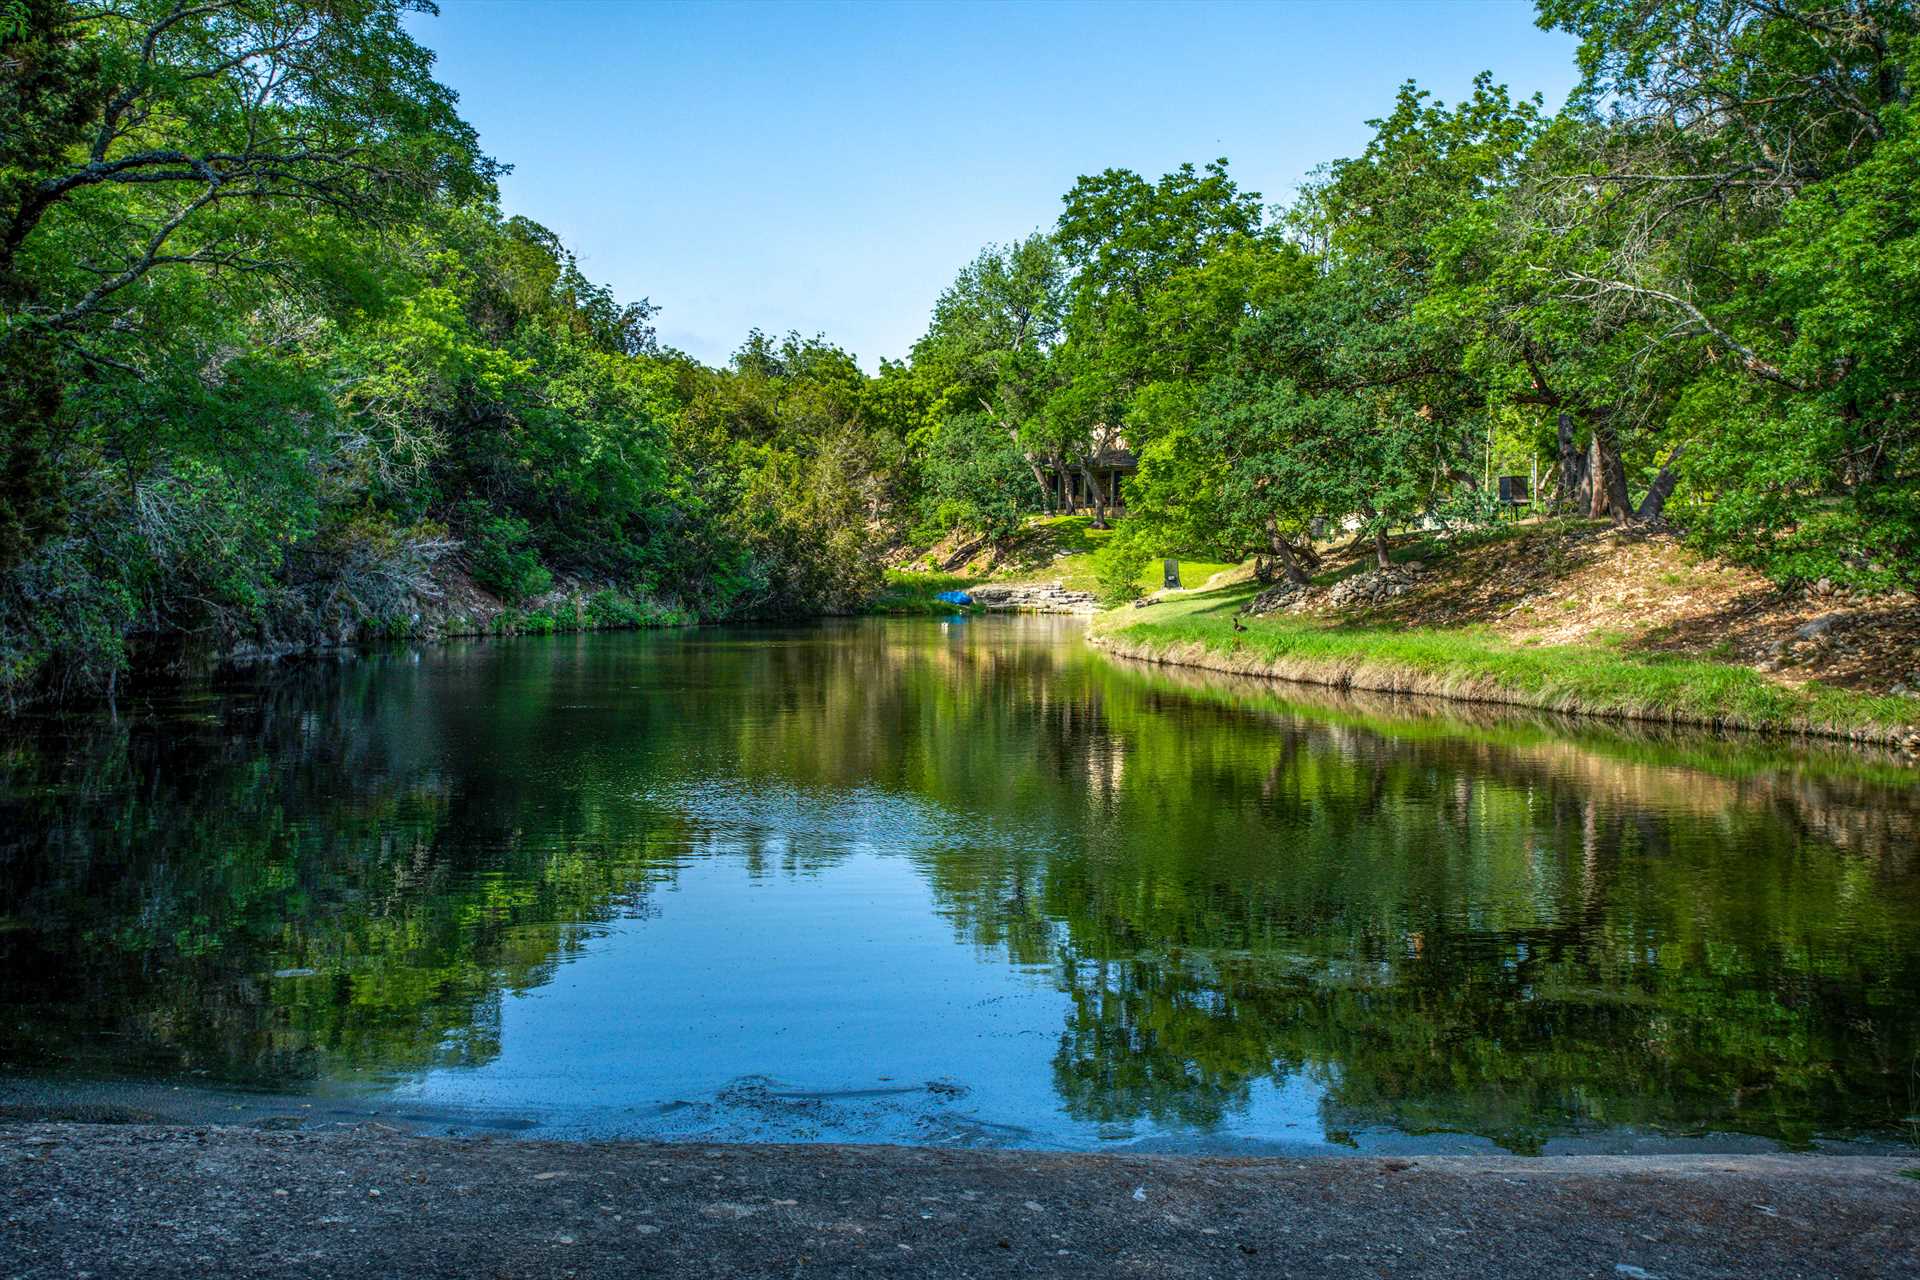                                                 The Homestead sits on 230 scenic Hill Country acres, including the serene bubbling waters of Fall Creek.